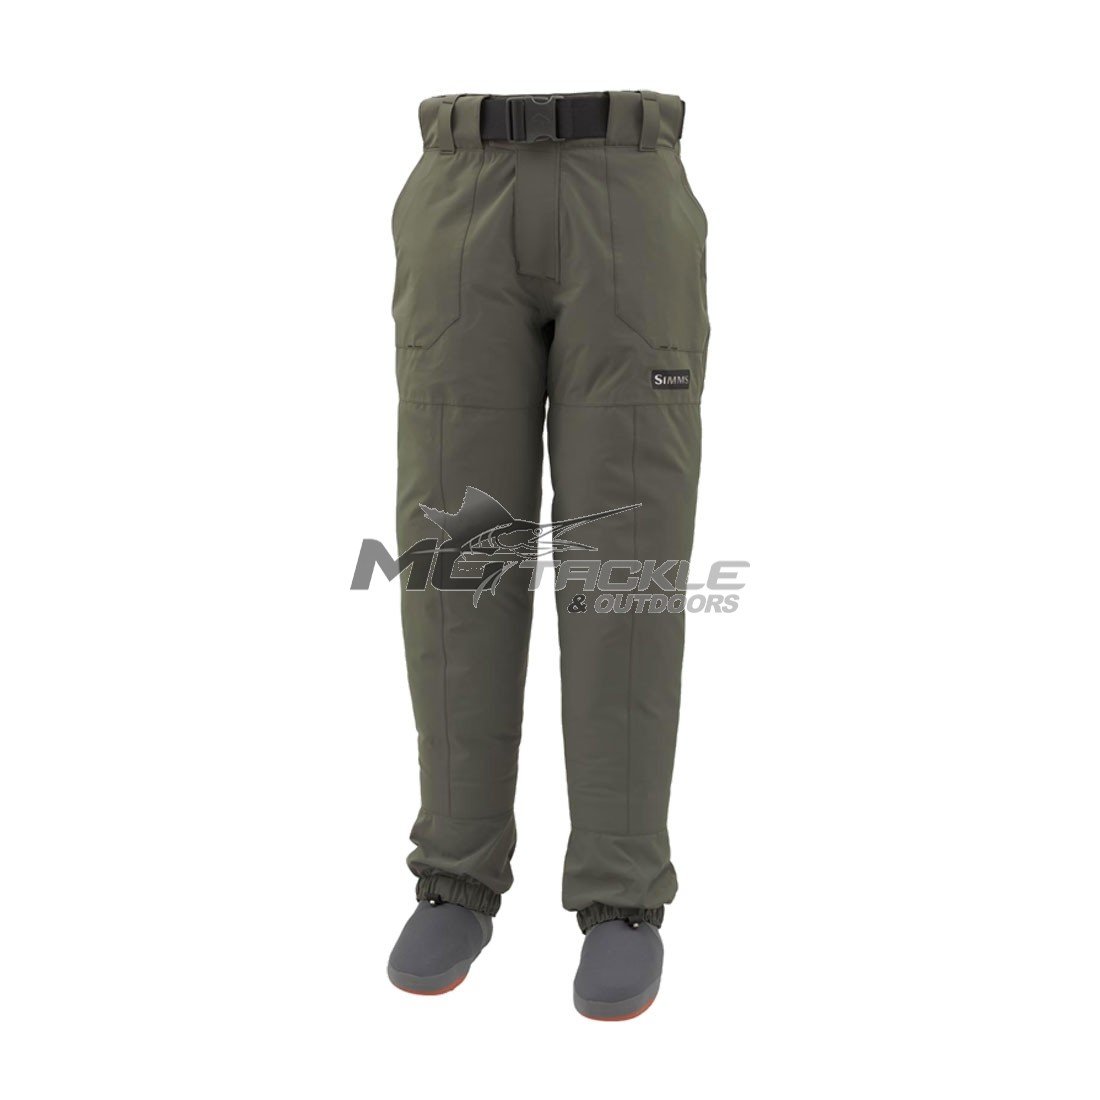 Stocking Foot Fishing Waders Fishing Wader Pants Breathable Absorbent  Sealed Comfortable with Strap Fixing Clip for Men and Women for Outdoor  Fishing 42 Size 150155cm 40kg  Amazonin Shoes  Handbags